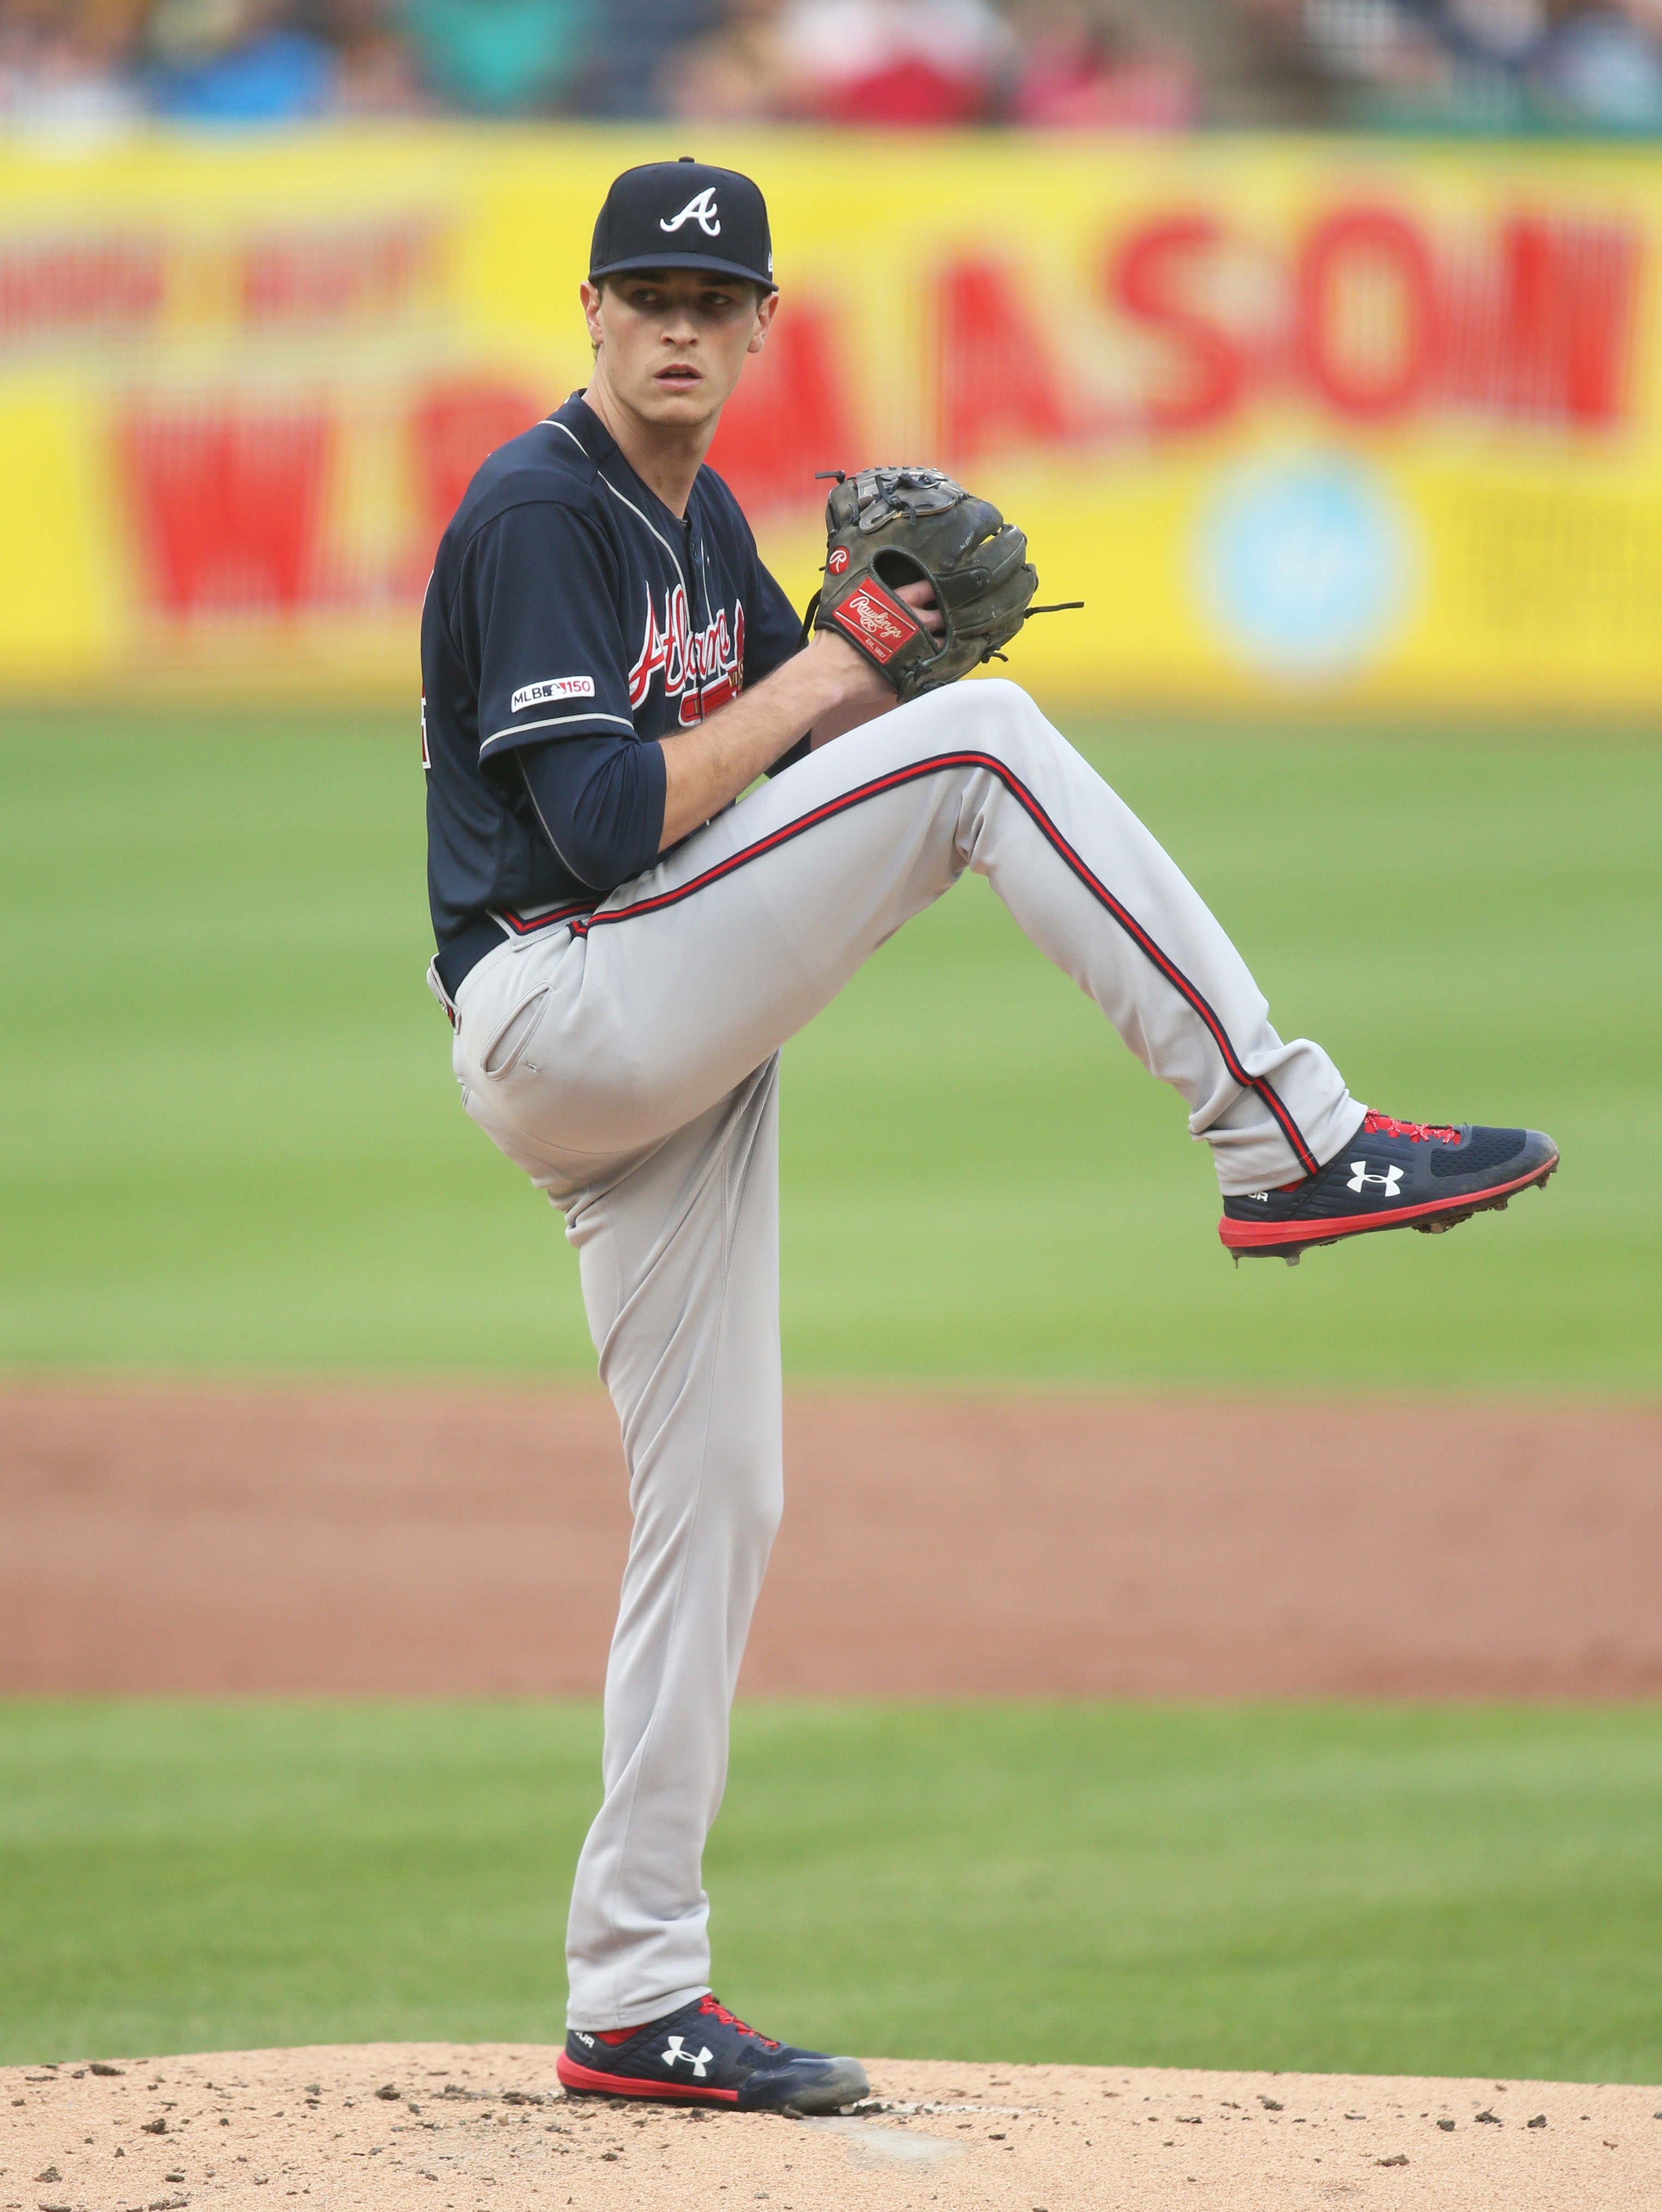 Max Fried - Net Worth 2022/2021 Age, Height, Bio, Family, Career, Wiki